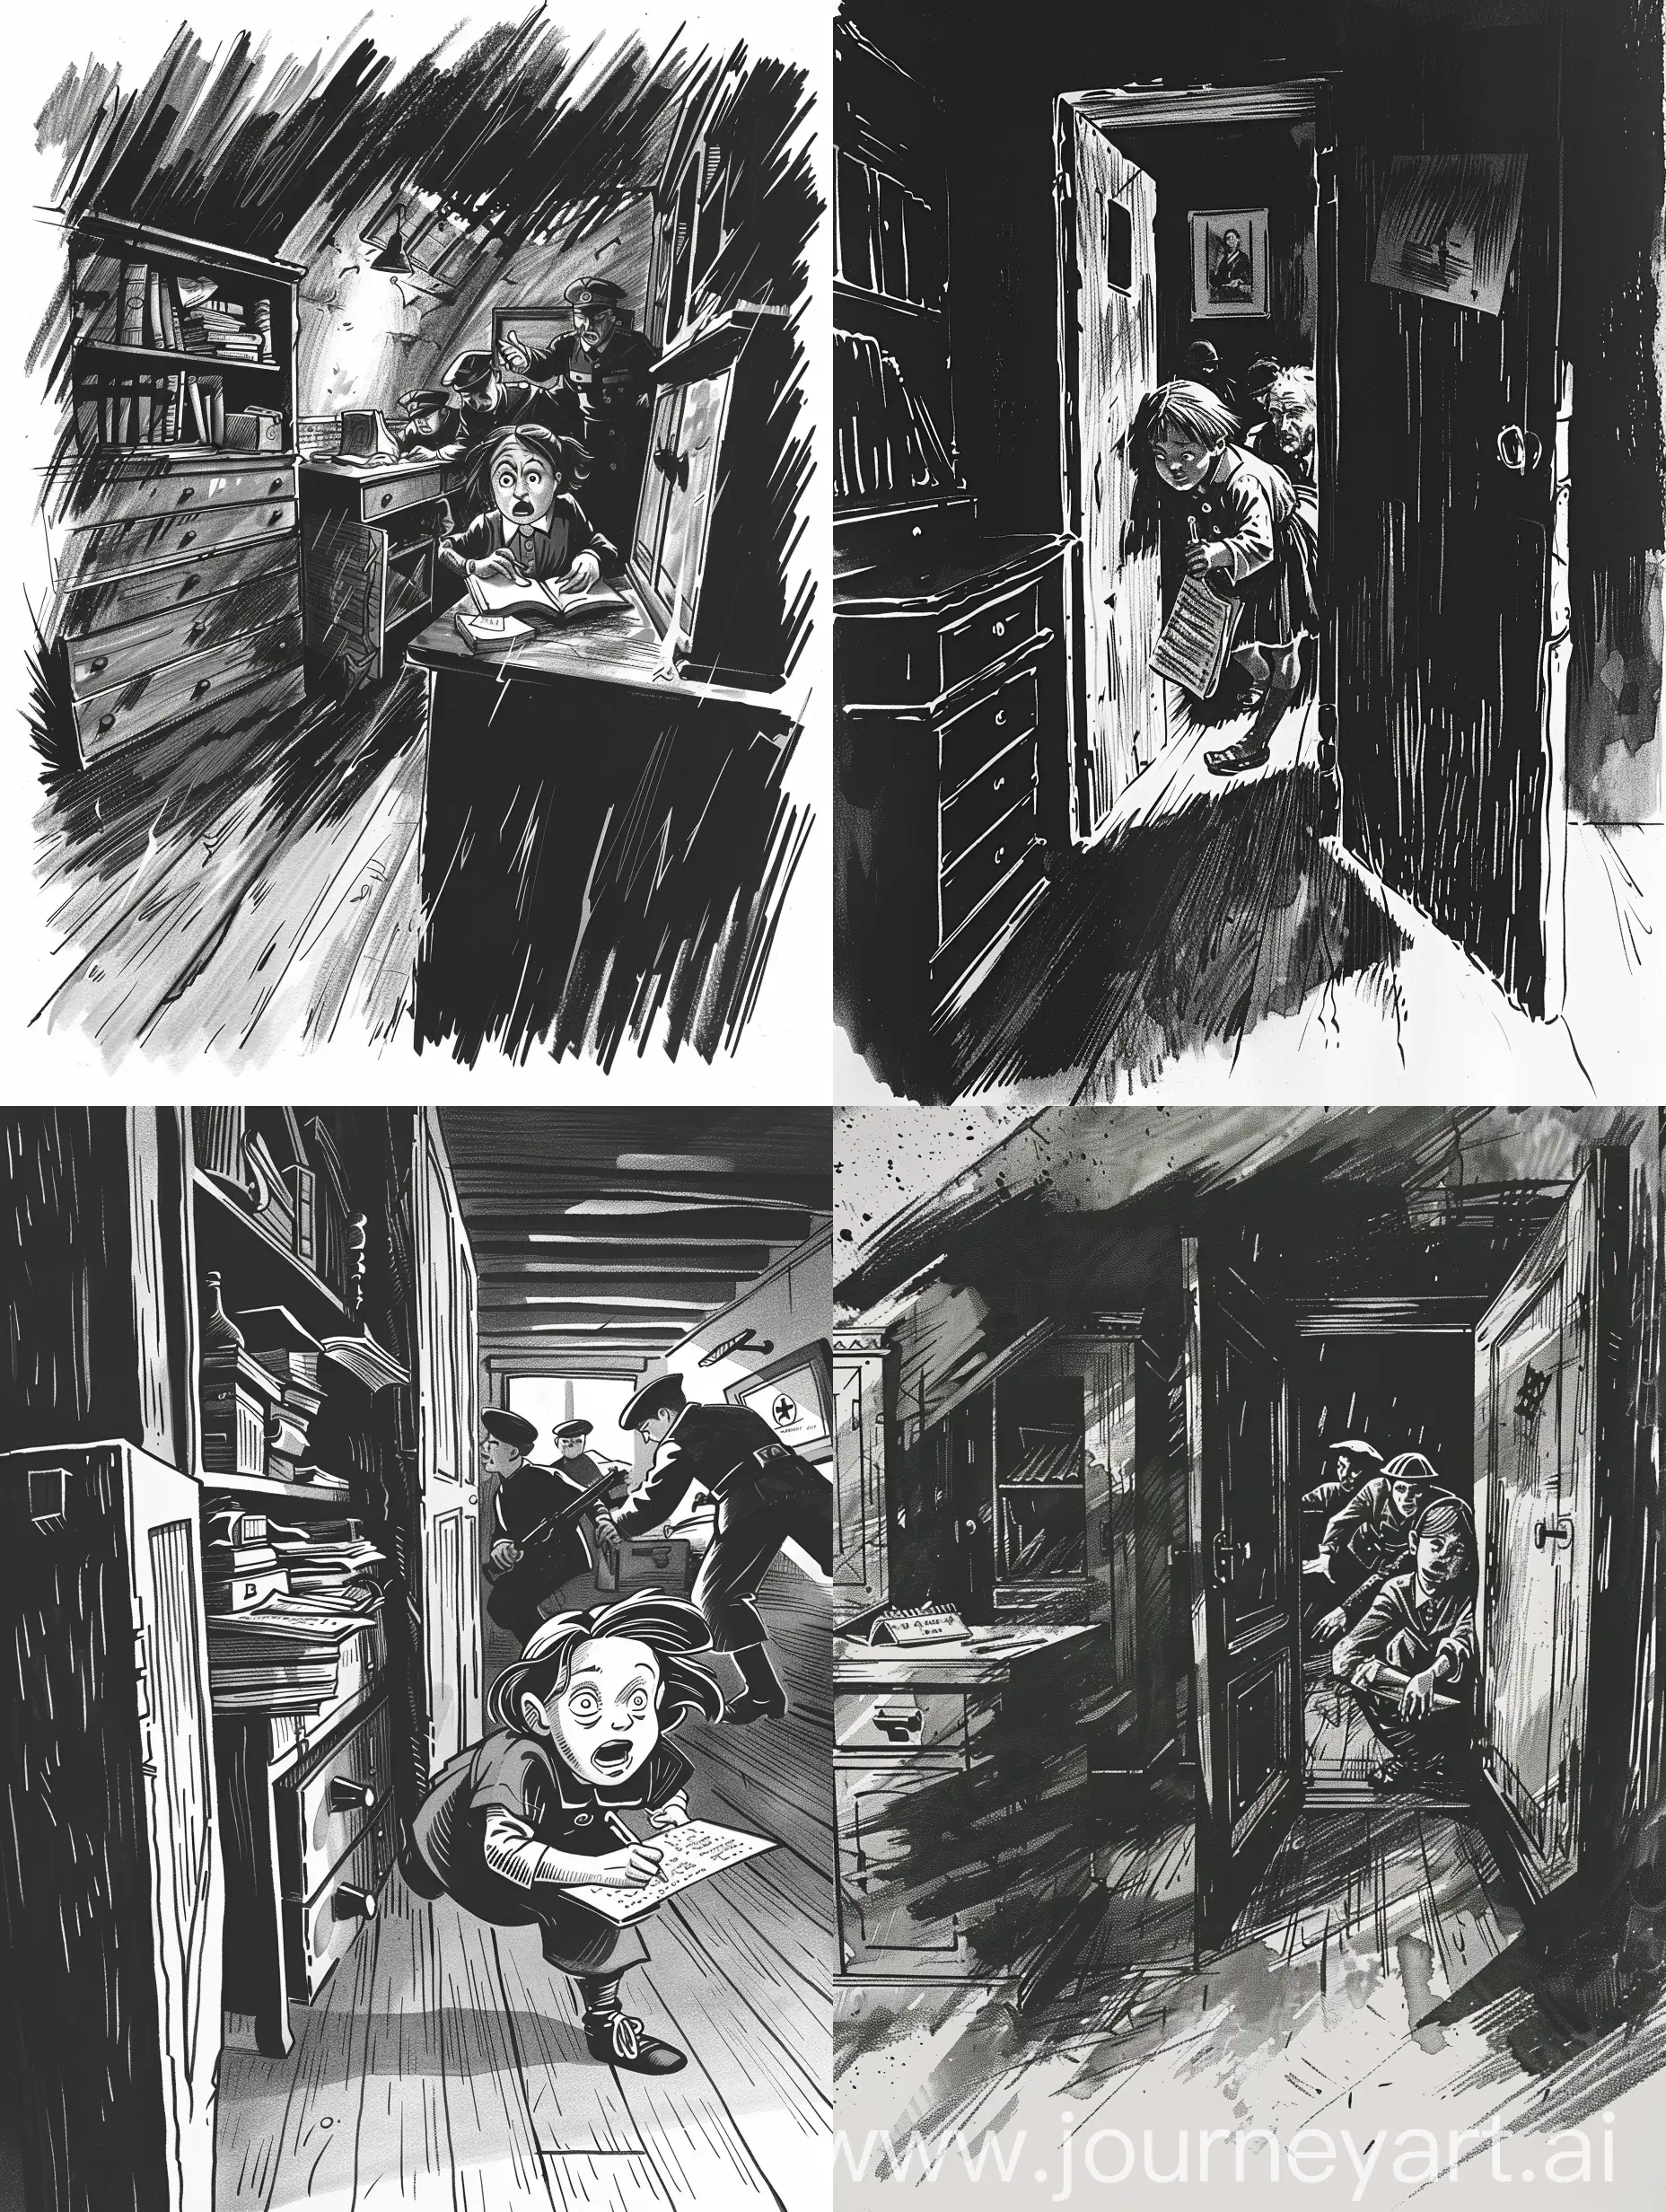 Dark illustration for a World War II historie book; small Jewish girl hiding on horror from danger behind cabinets, to finish writing her journal; old attic; dynamic lines and strokes; german authorities are storming the room; dramatic scene, emphasis on fear